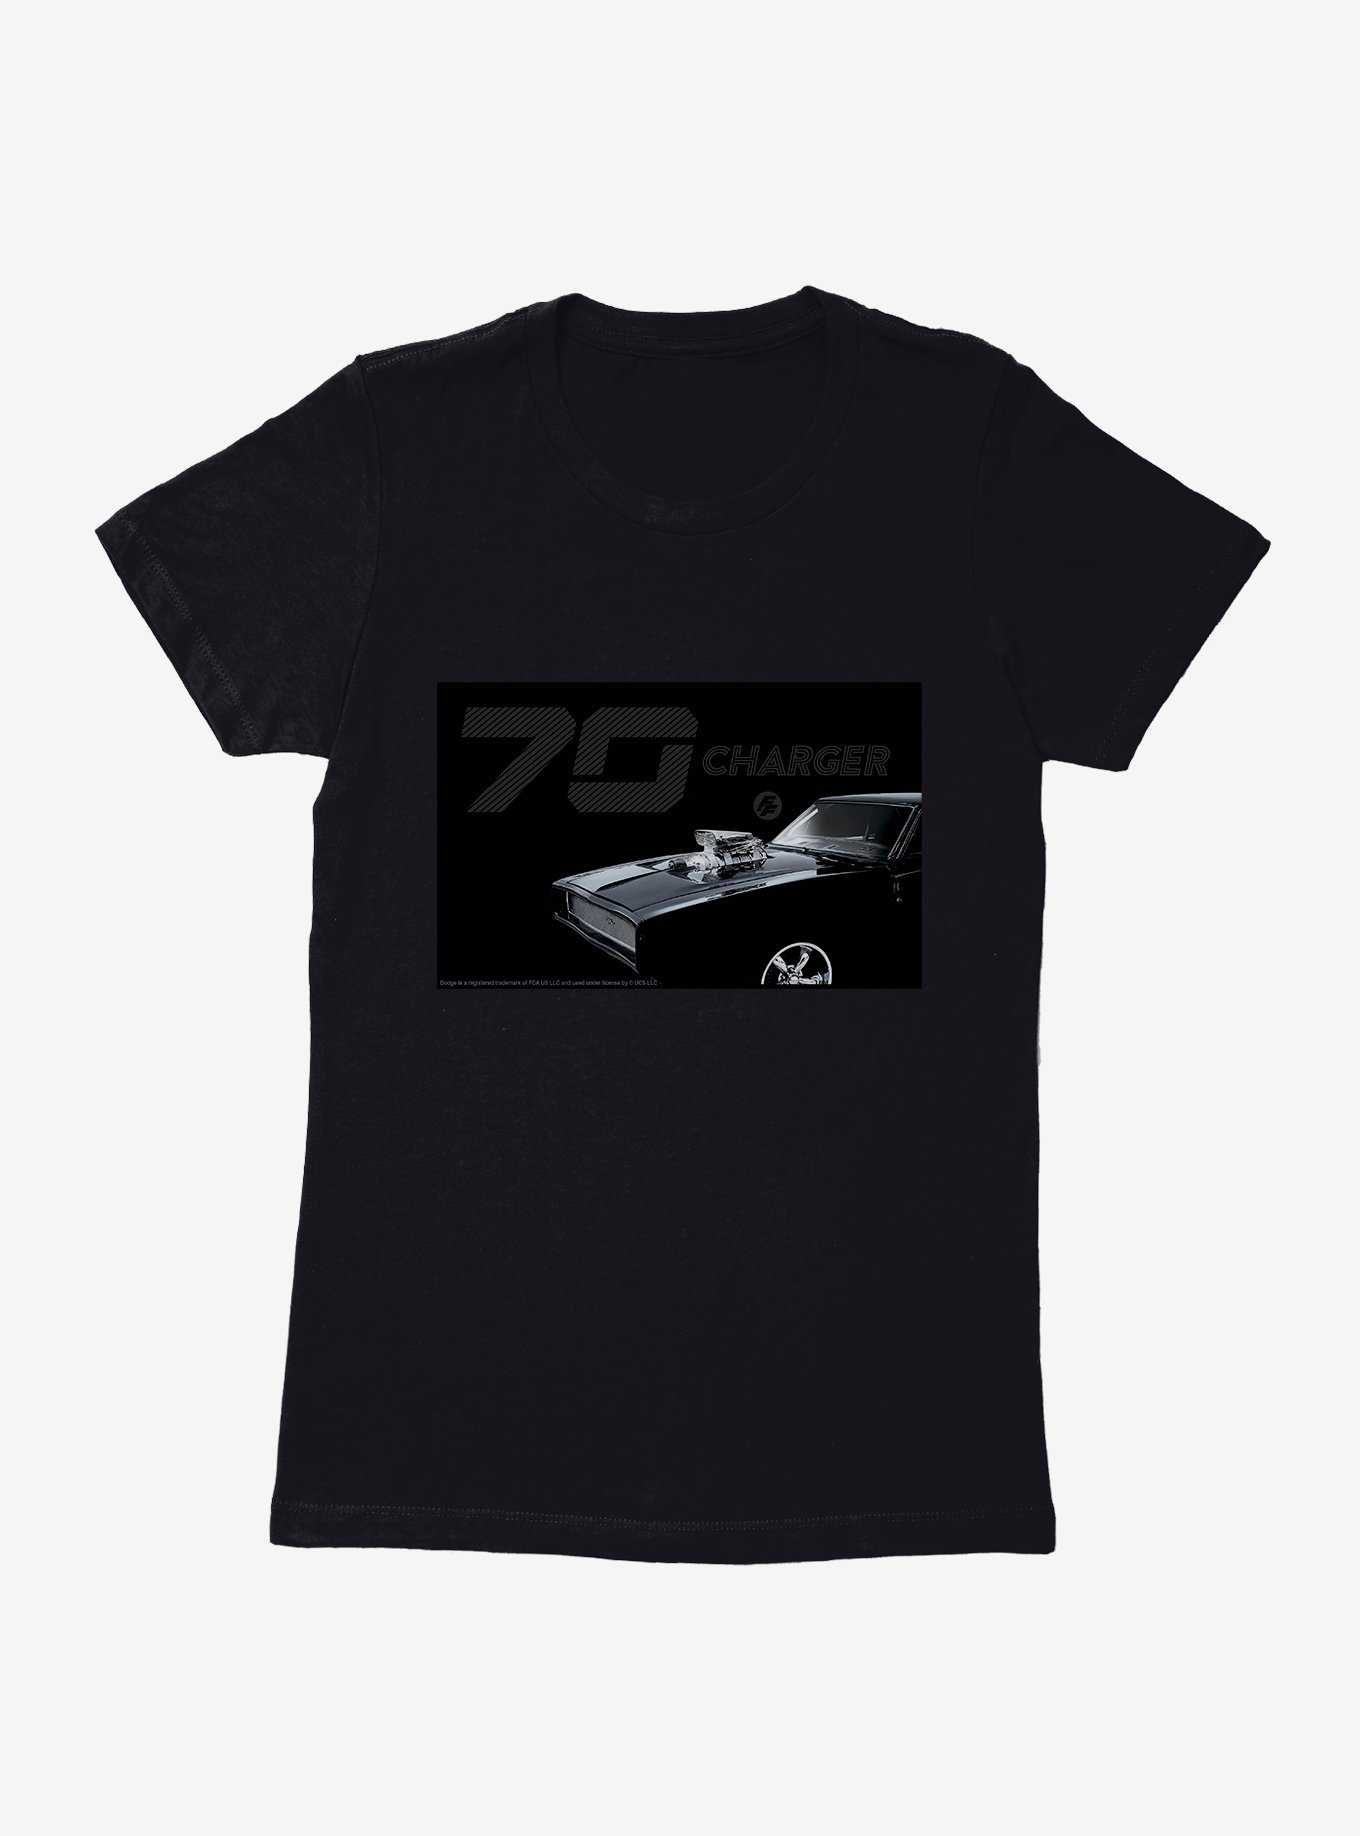 Fast & Furious '70 Charger Womens T-Shirt, , hi-res